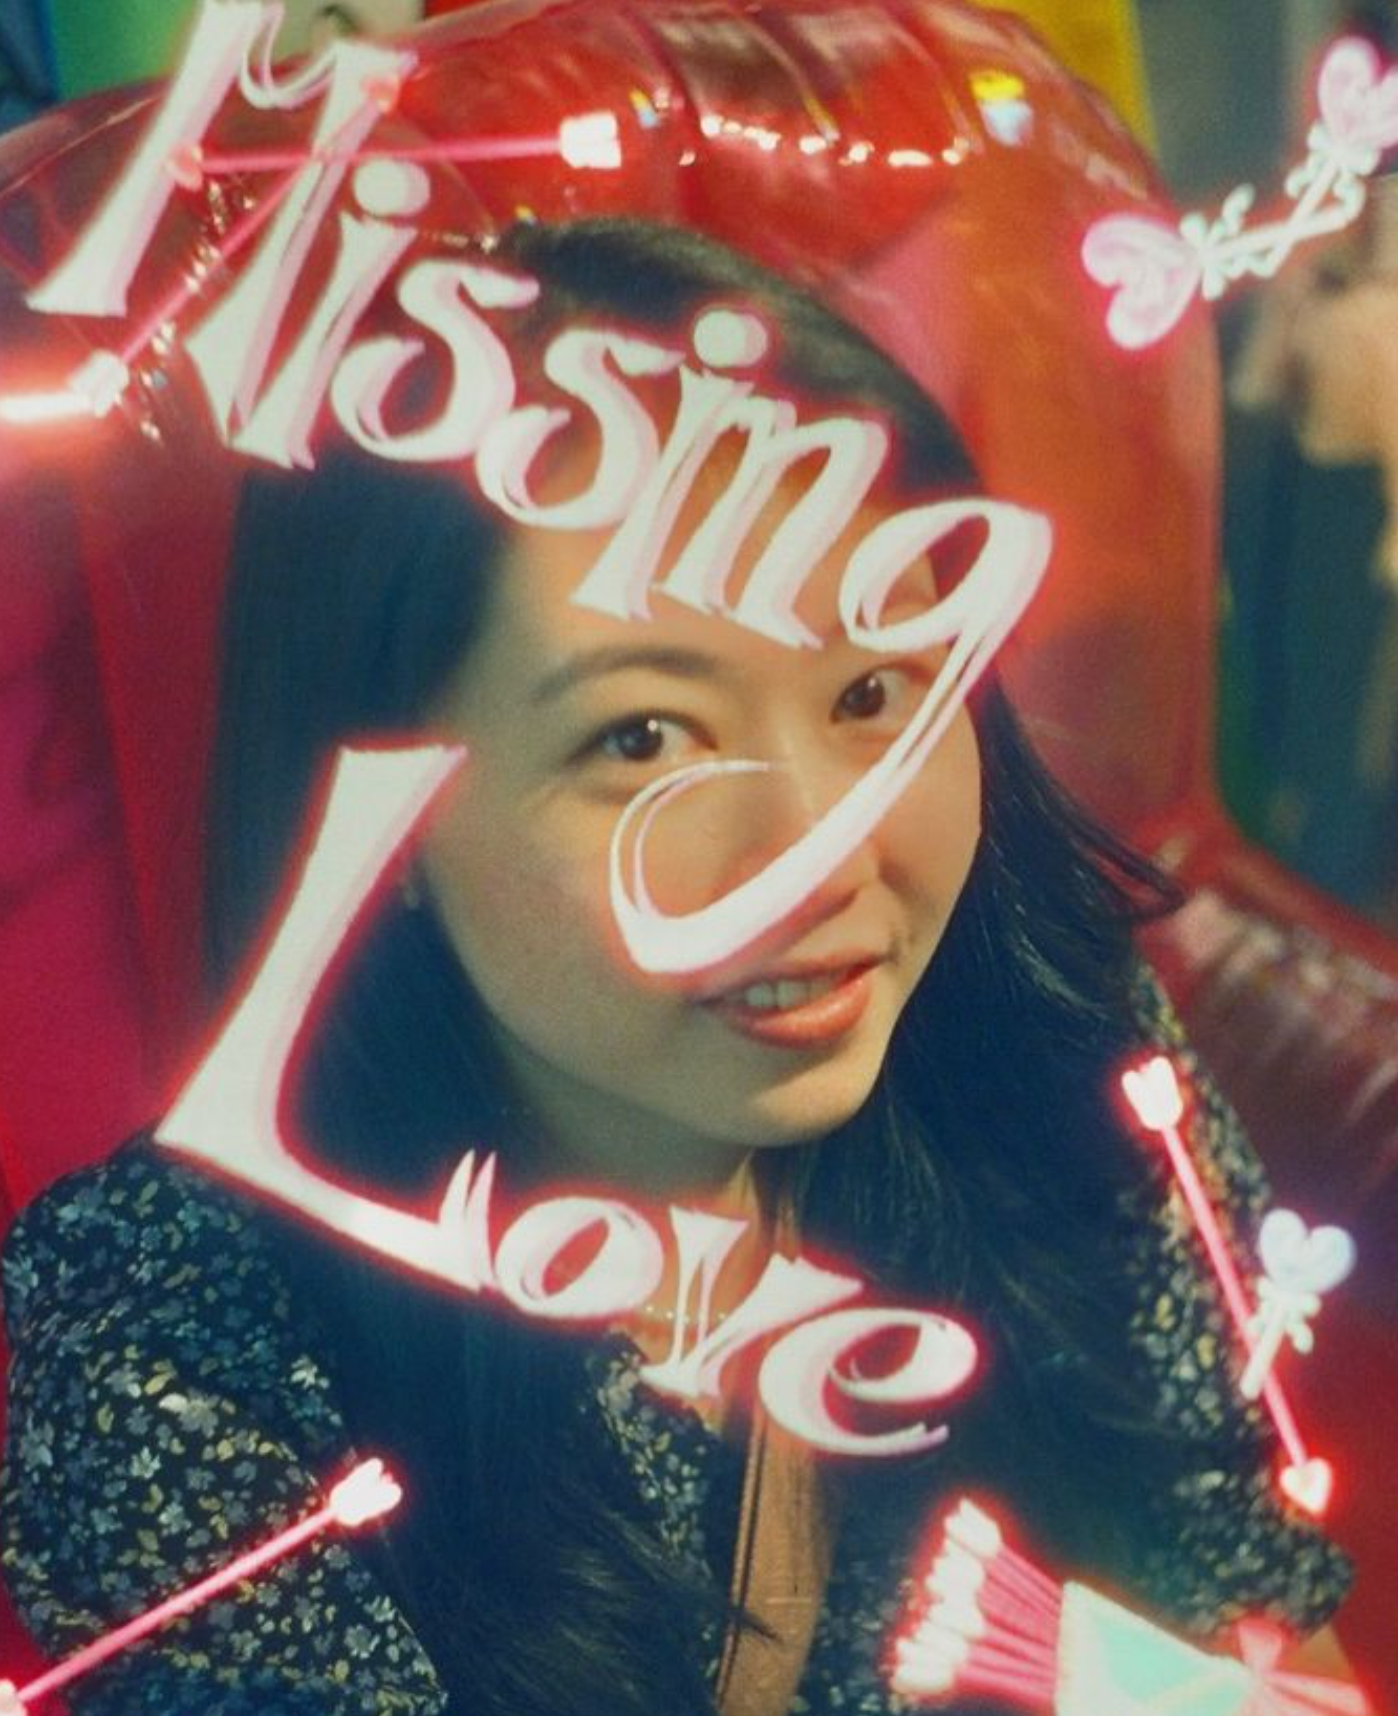 [FILM HOLIC] Cupid missing love 36exp Color Negative Special Effect Film